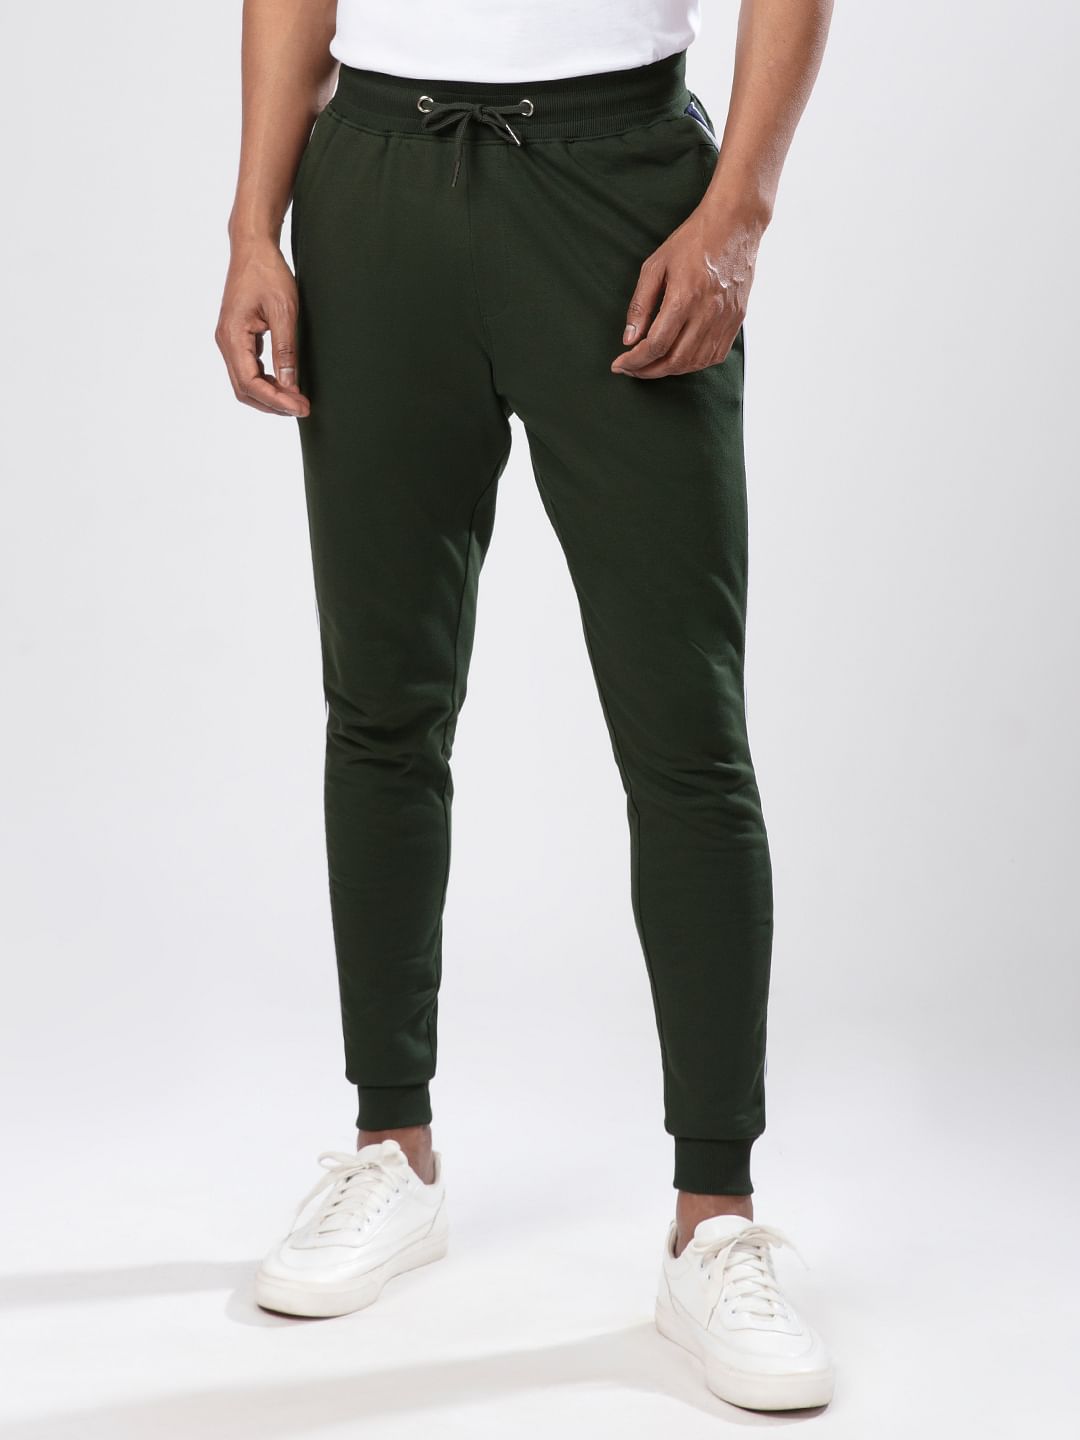 Solids: Military Olive